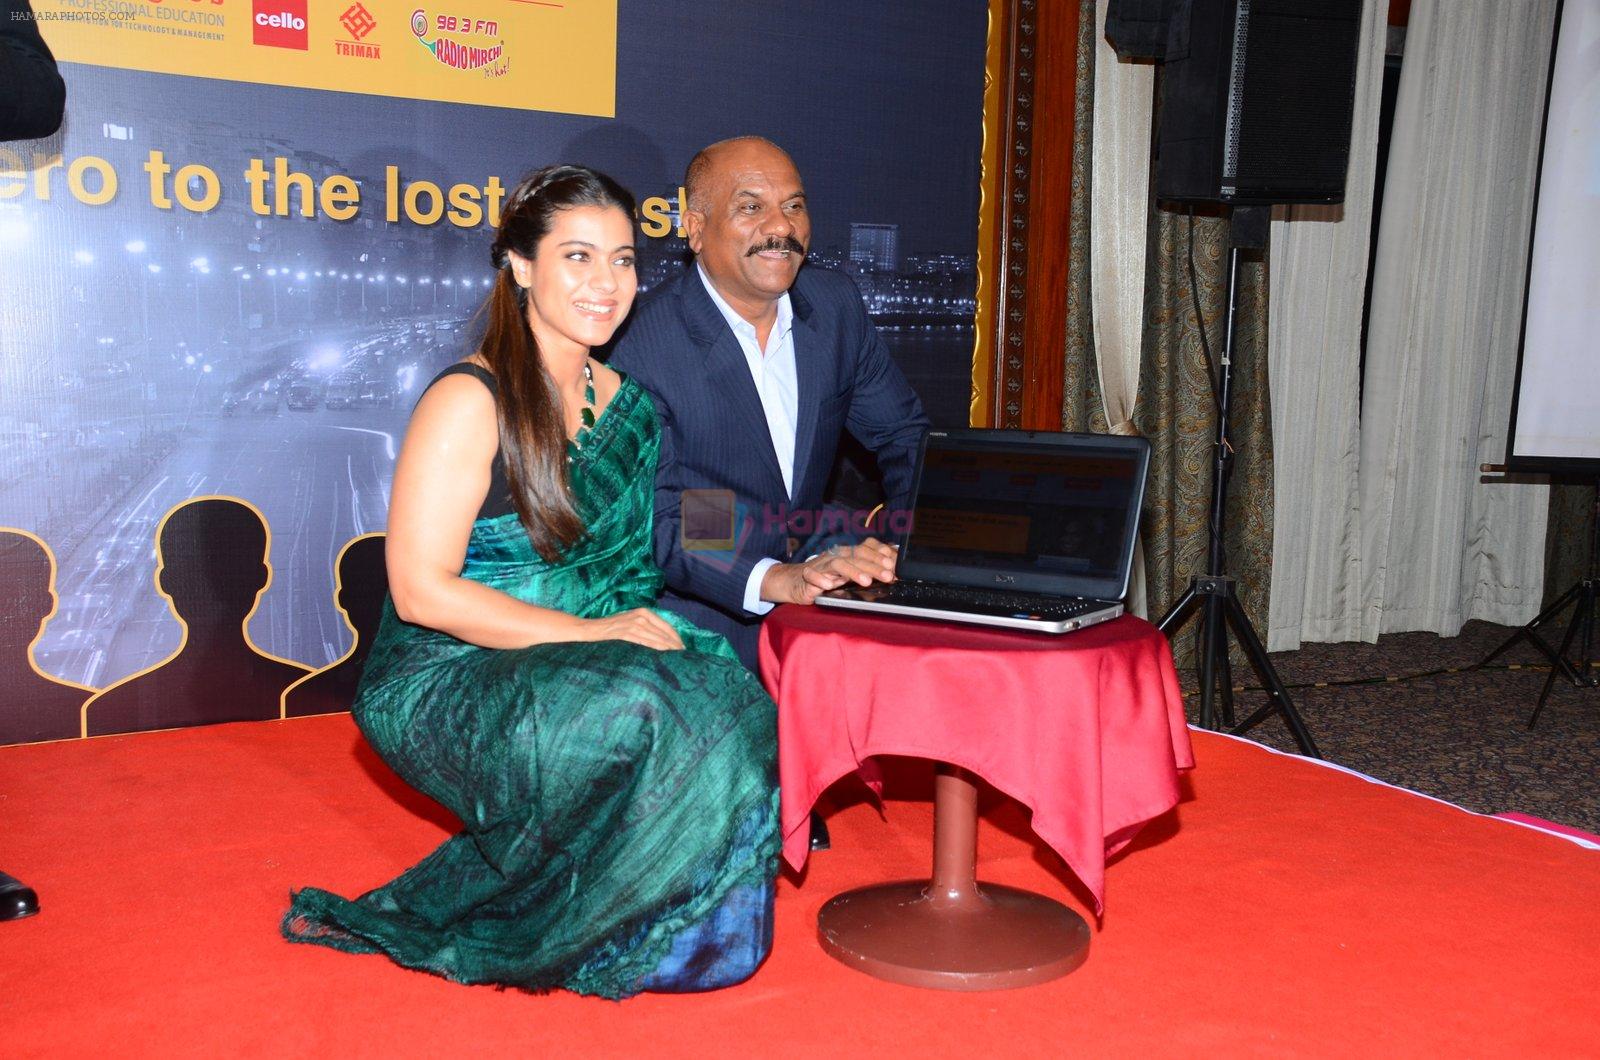 Kajol at Missing people site launch  on 27th Jan 2016